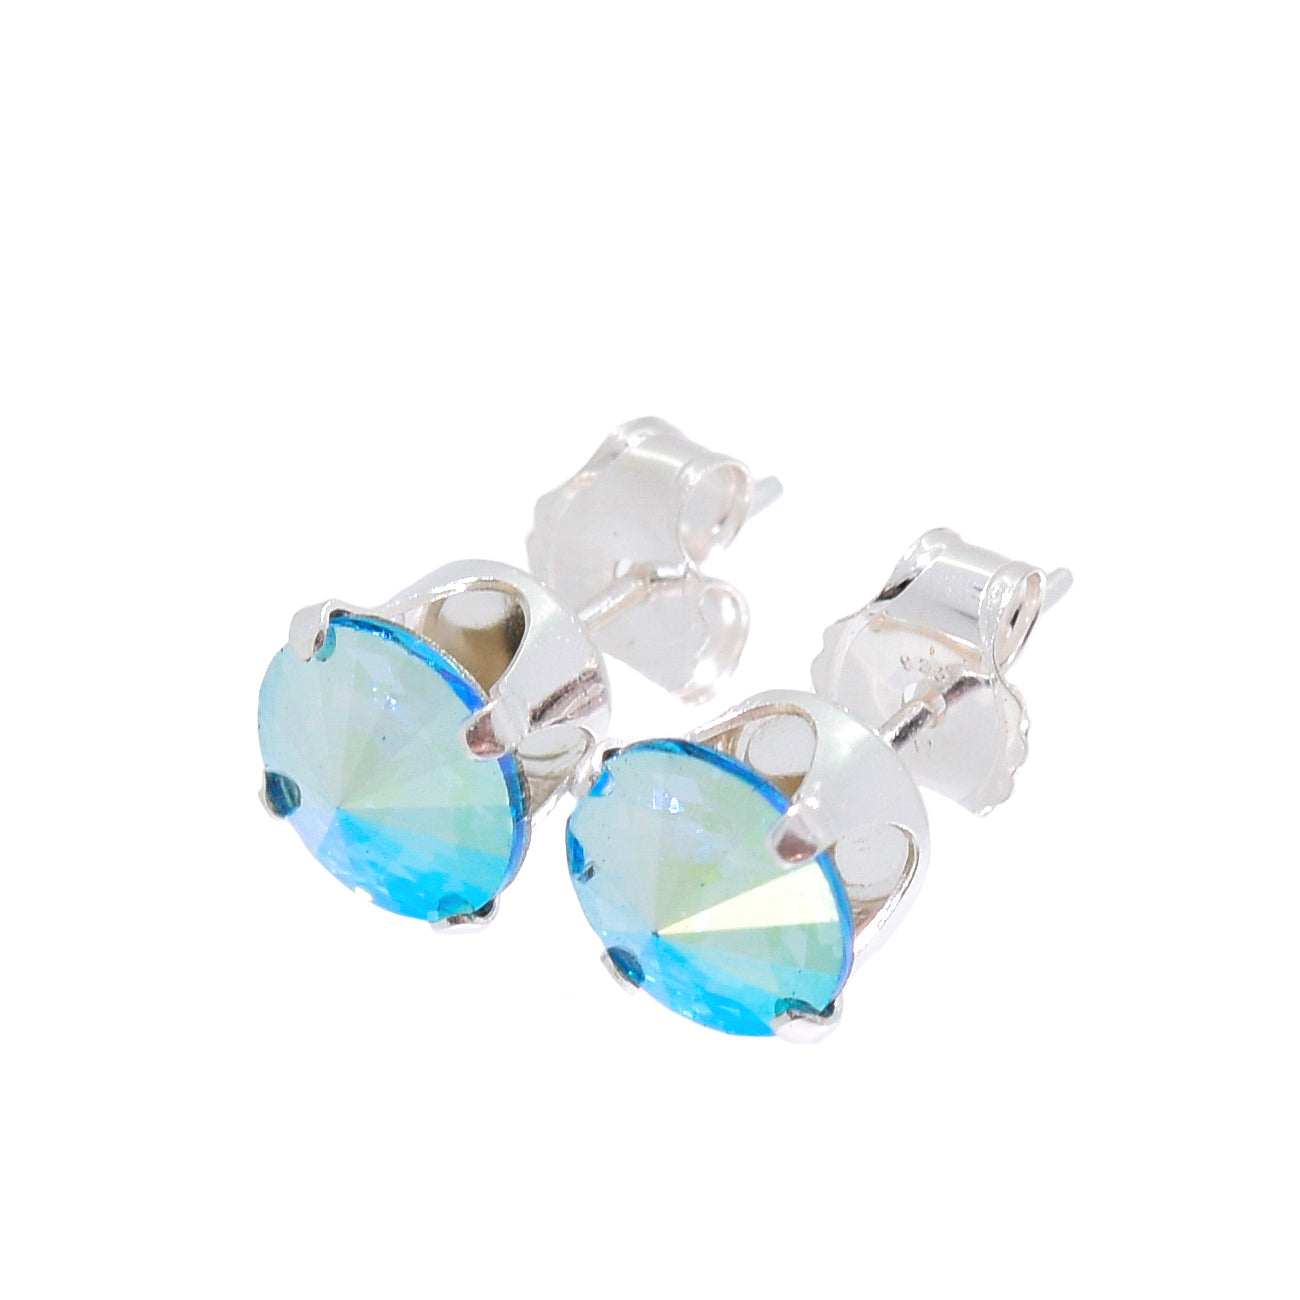 pewterhooter® Women's Classic Collection 925 Sterling silver earrings with brilliant Aquamarine Aurore Boreale crystals, packaged in a gift box for any occasion.